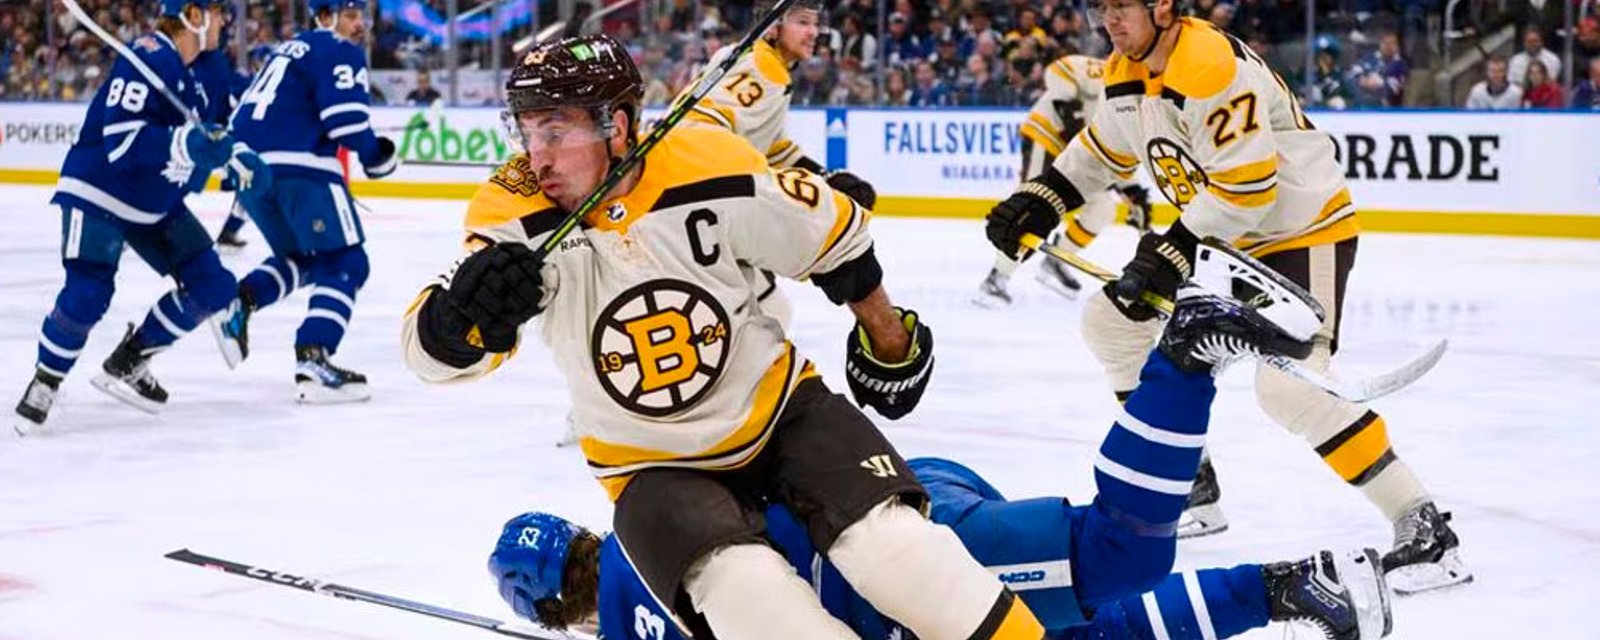 Brad Marchand beats Leafs, after mourning loss in his family